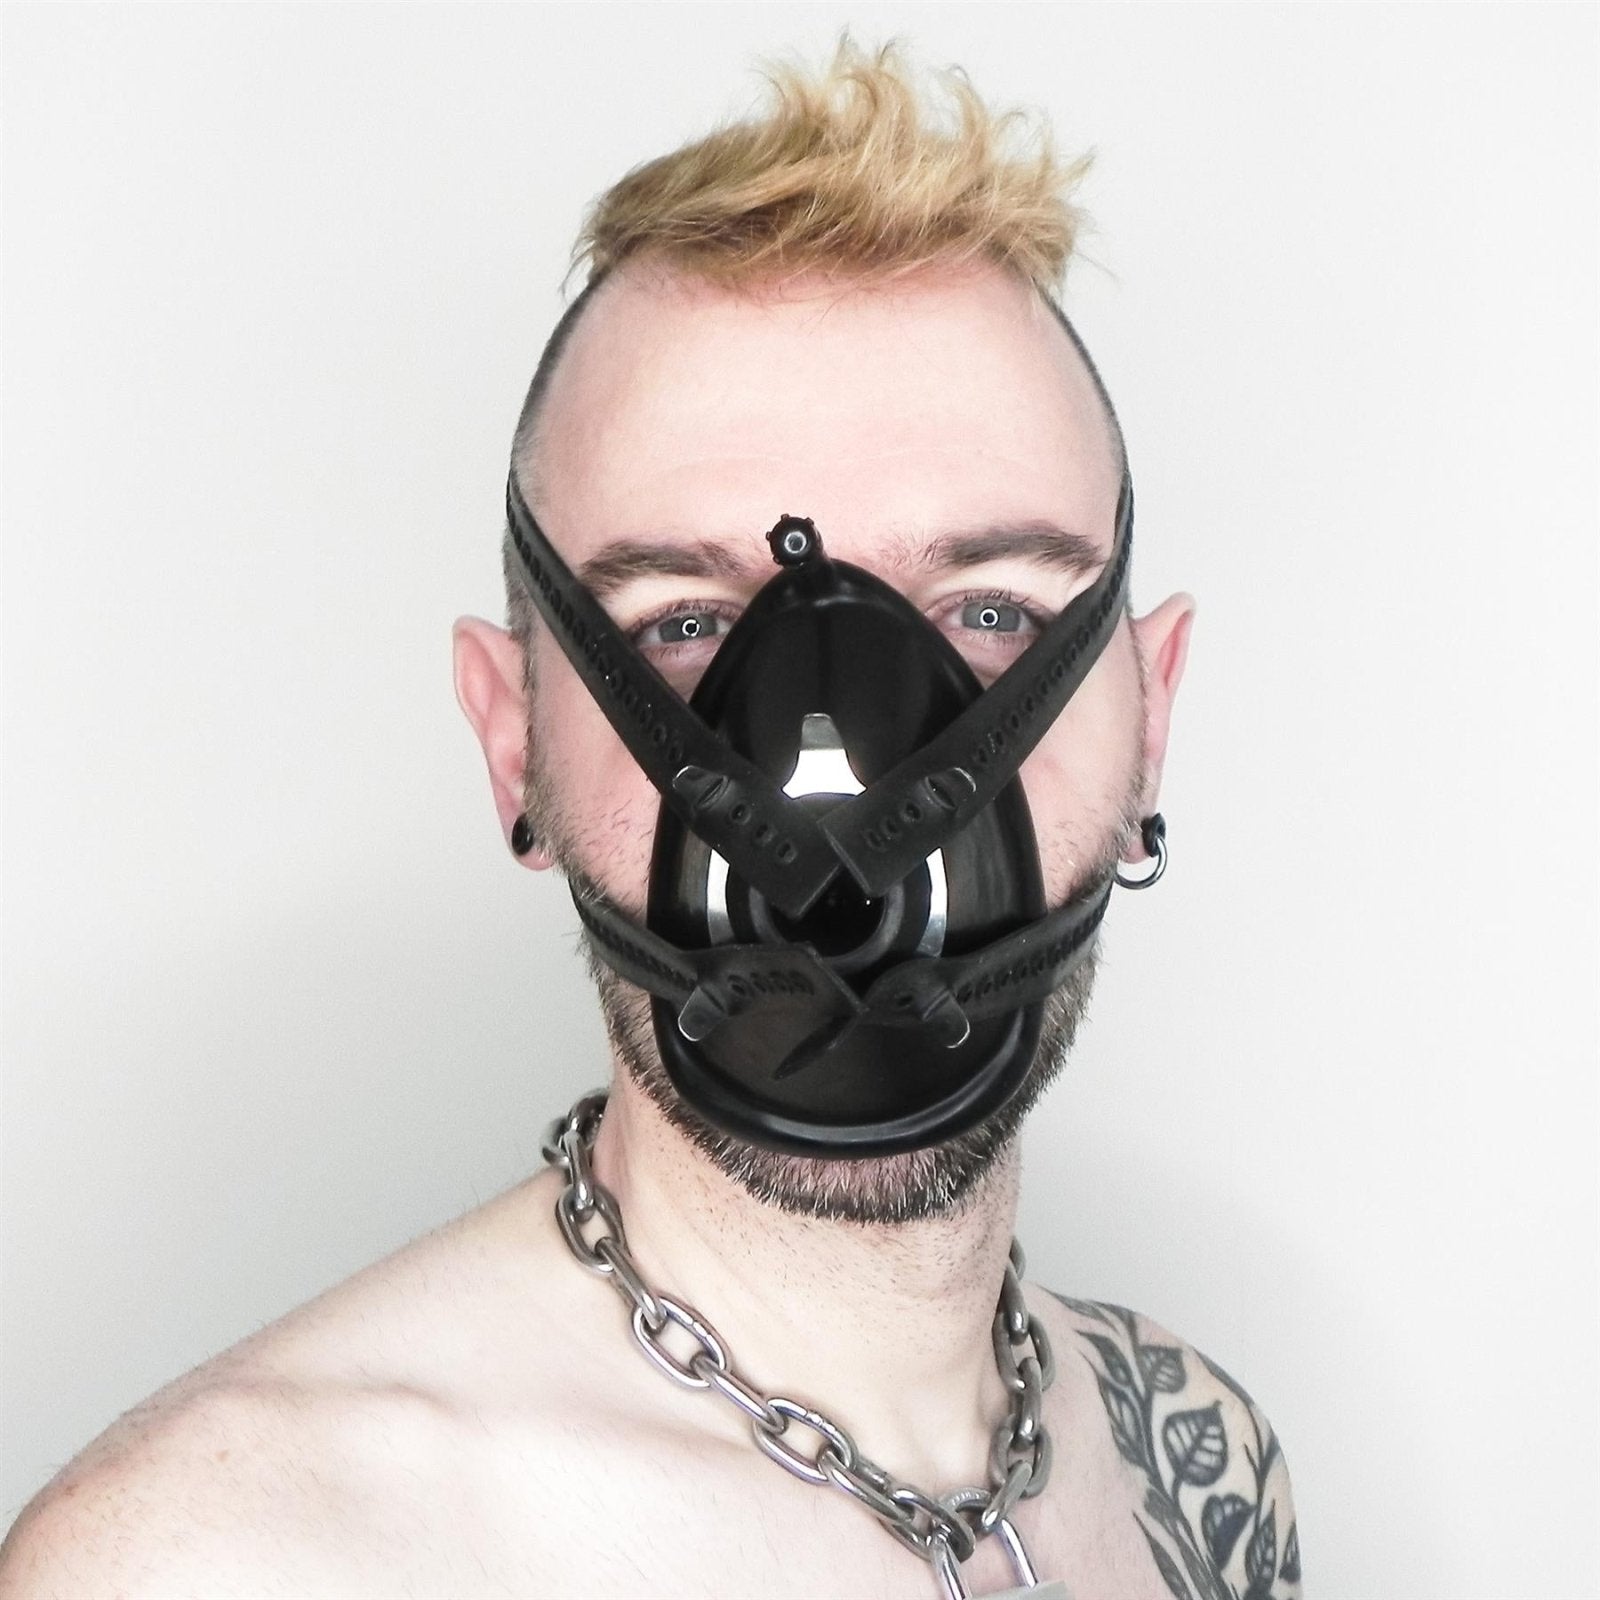 Rubber Anaesthesia Face Mask & Head Harness, Black from ASCO.